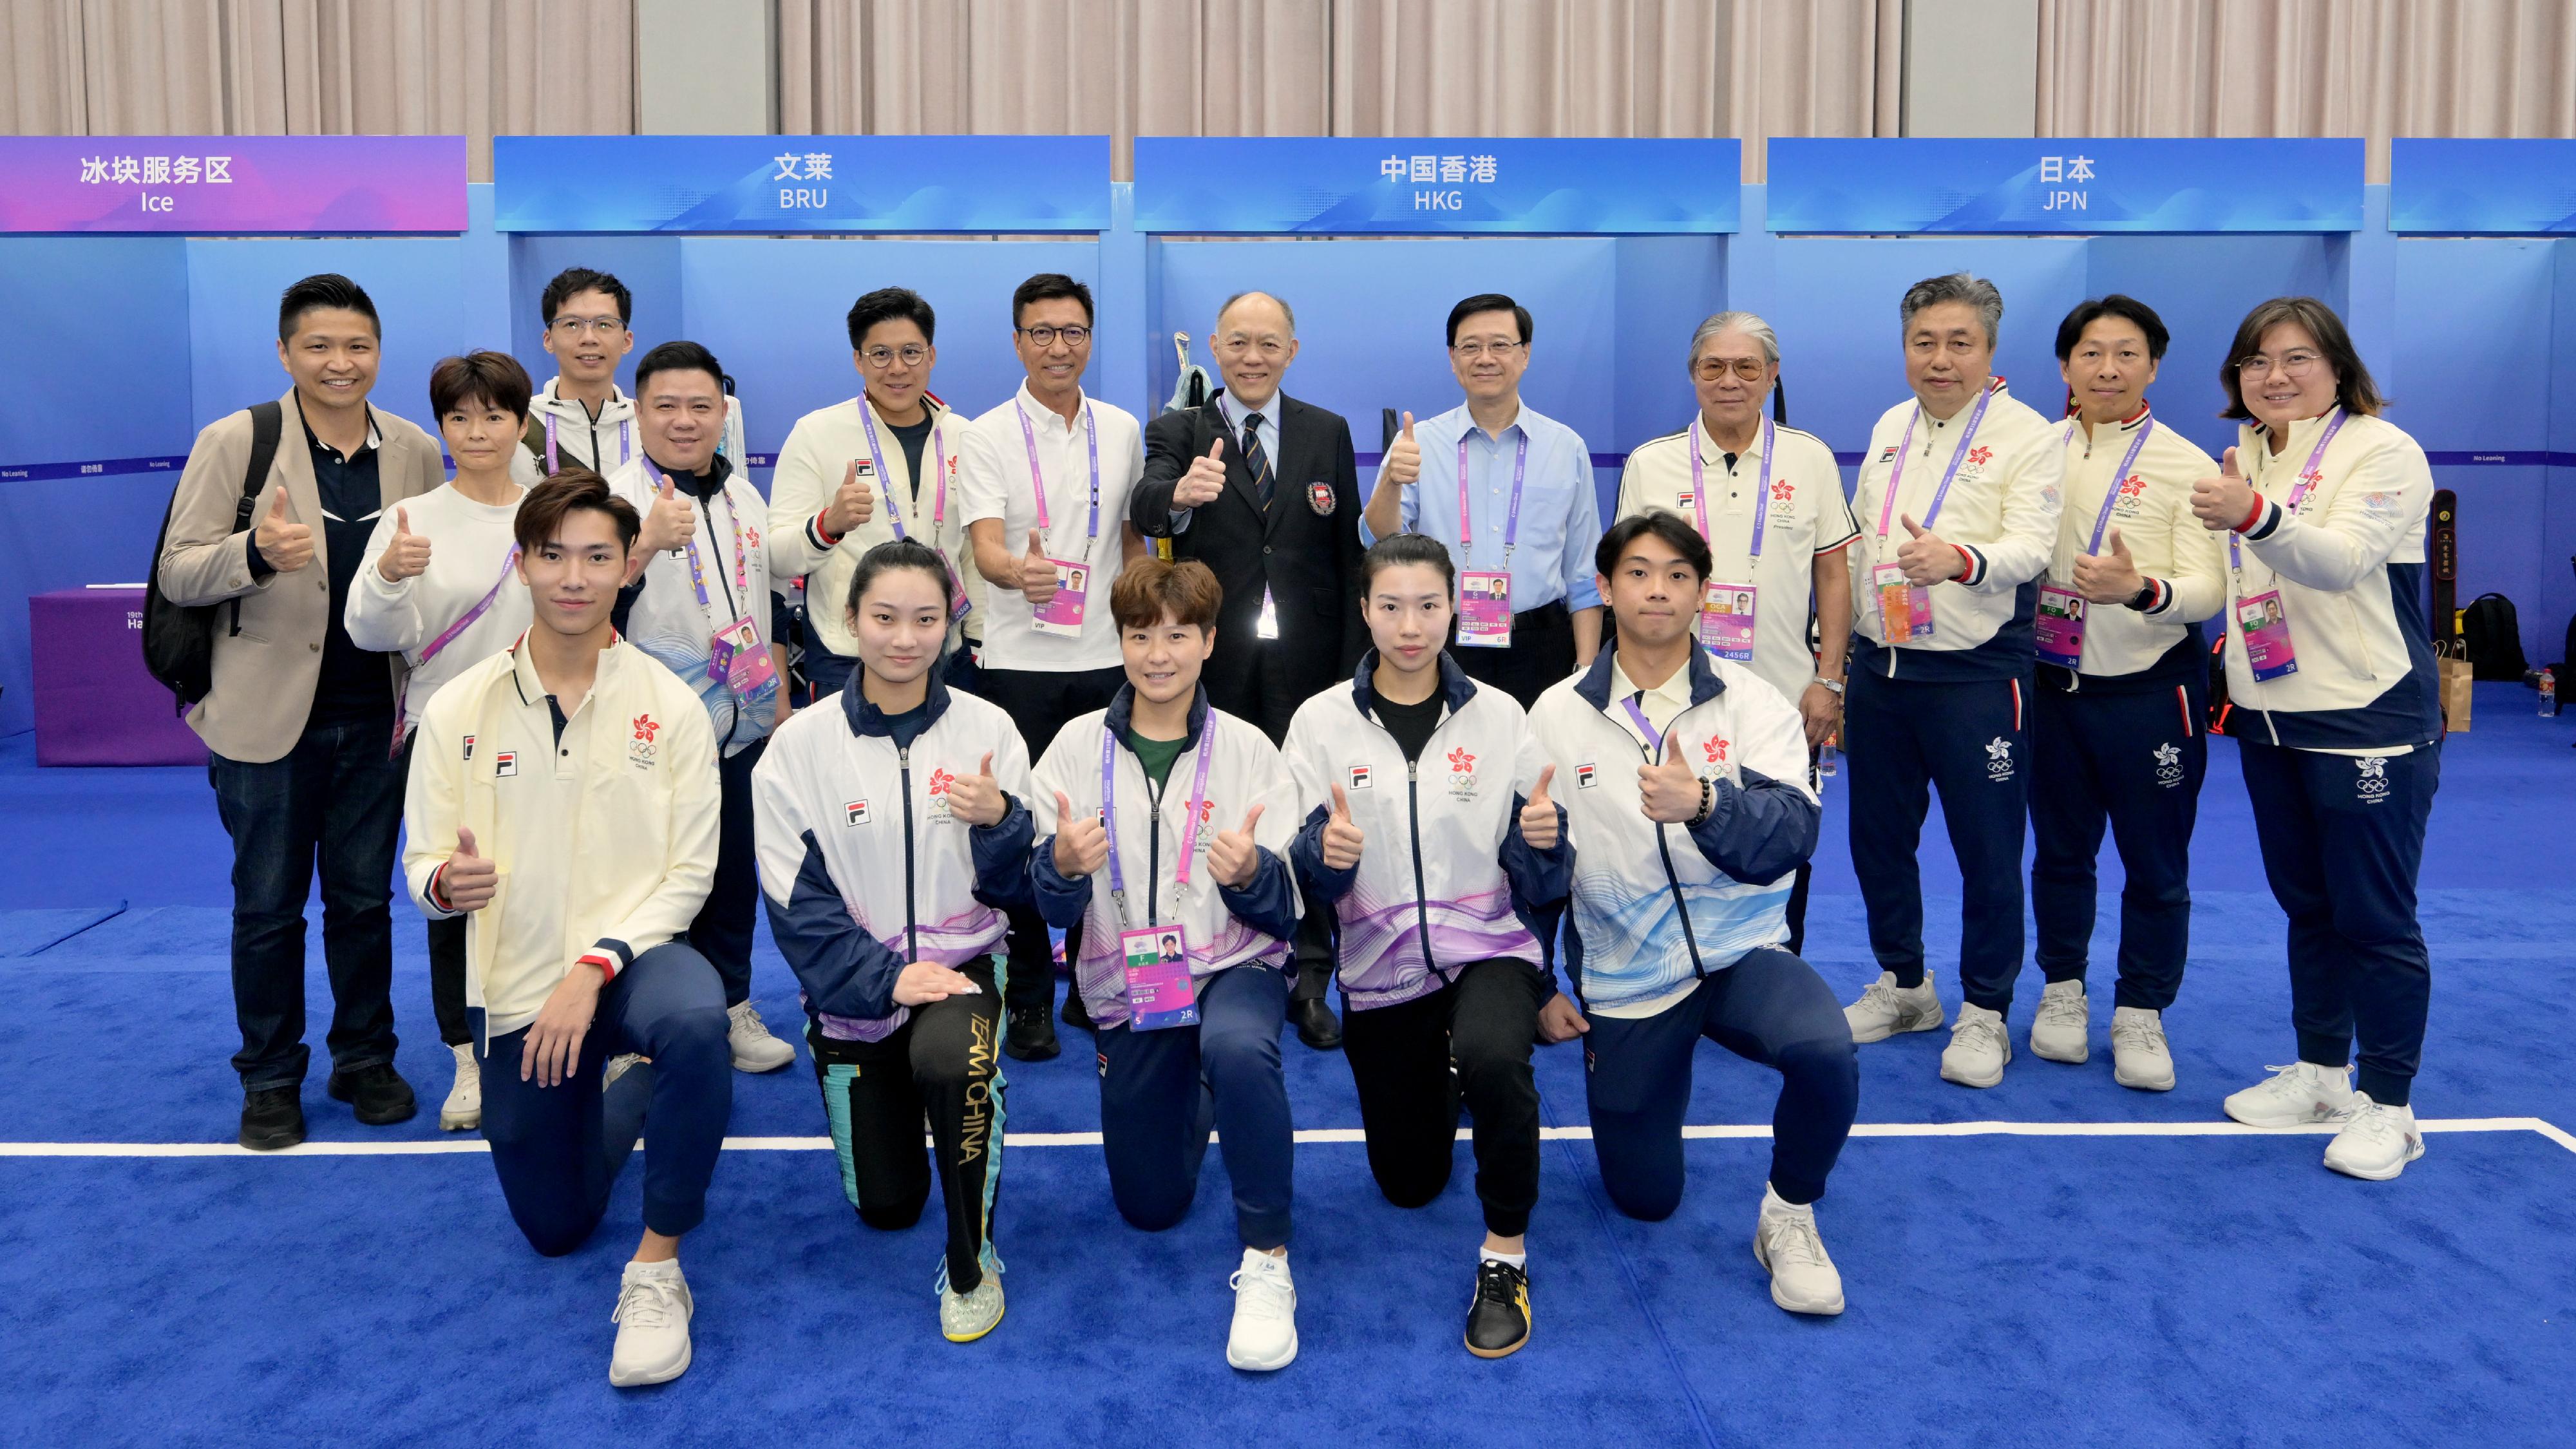 The Chief Executive, Mr John Lee, led a Hong Kong Special Administrative Region Government delegation to Hangzhou and continued his visit programme today (September 24). Photo shows Mr Lee (back row, fifth right); the President of the Sports Federation & Olympic Committee of Hong Kong, China, Mr Timothy Fok (back row, fourth right); and the Chef de Mission of the Hong Kong, China Delegation to the 19th Asian Games Hangzhou, Mr Kenneth Fok (back row, fifth left); and the Commissioner for Sports in the Culture, Sports and Tourism Bureau, Mr Sam Wong (back row, sixth left), with Hong Kong athletes.